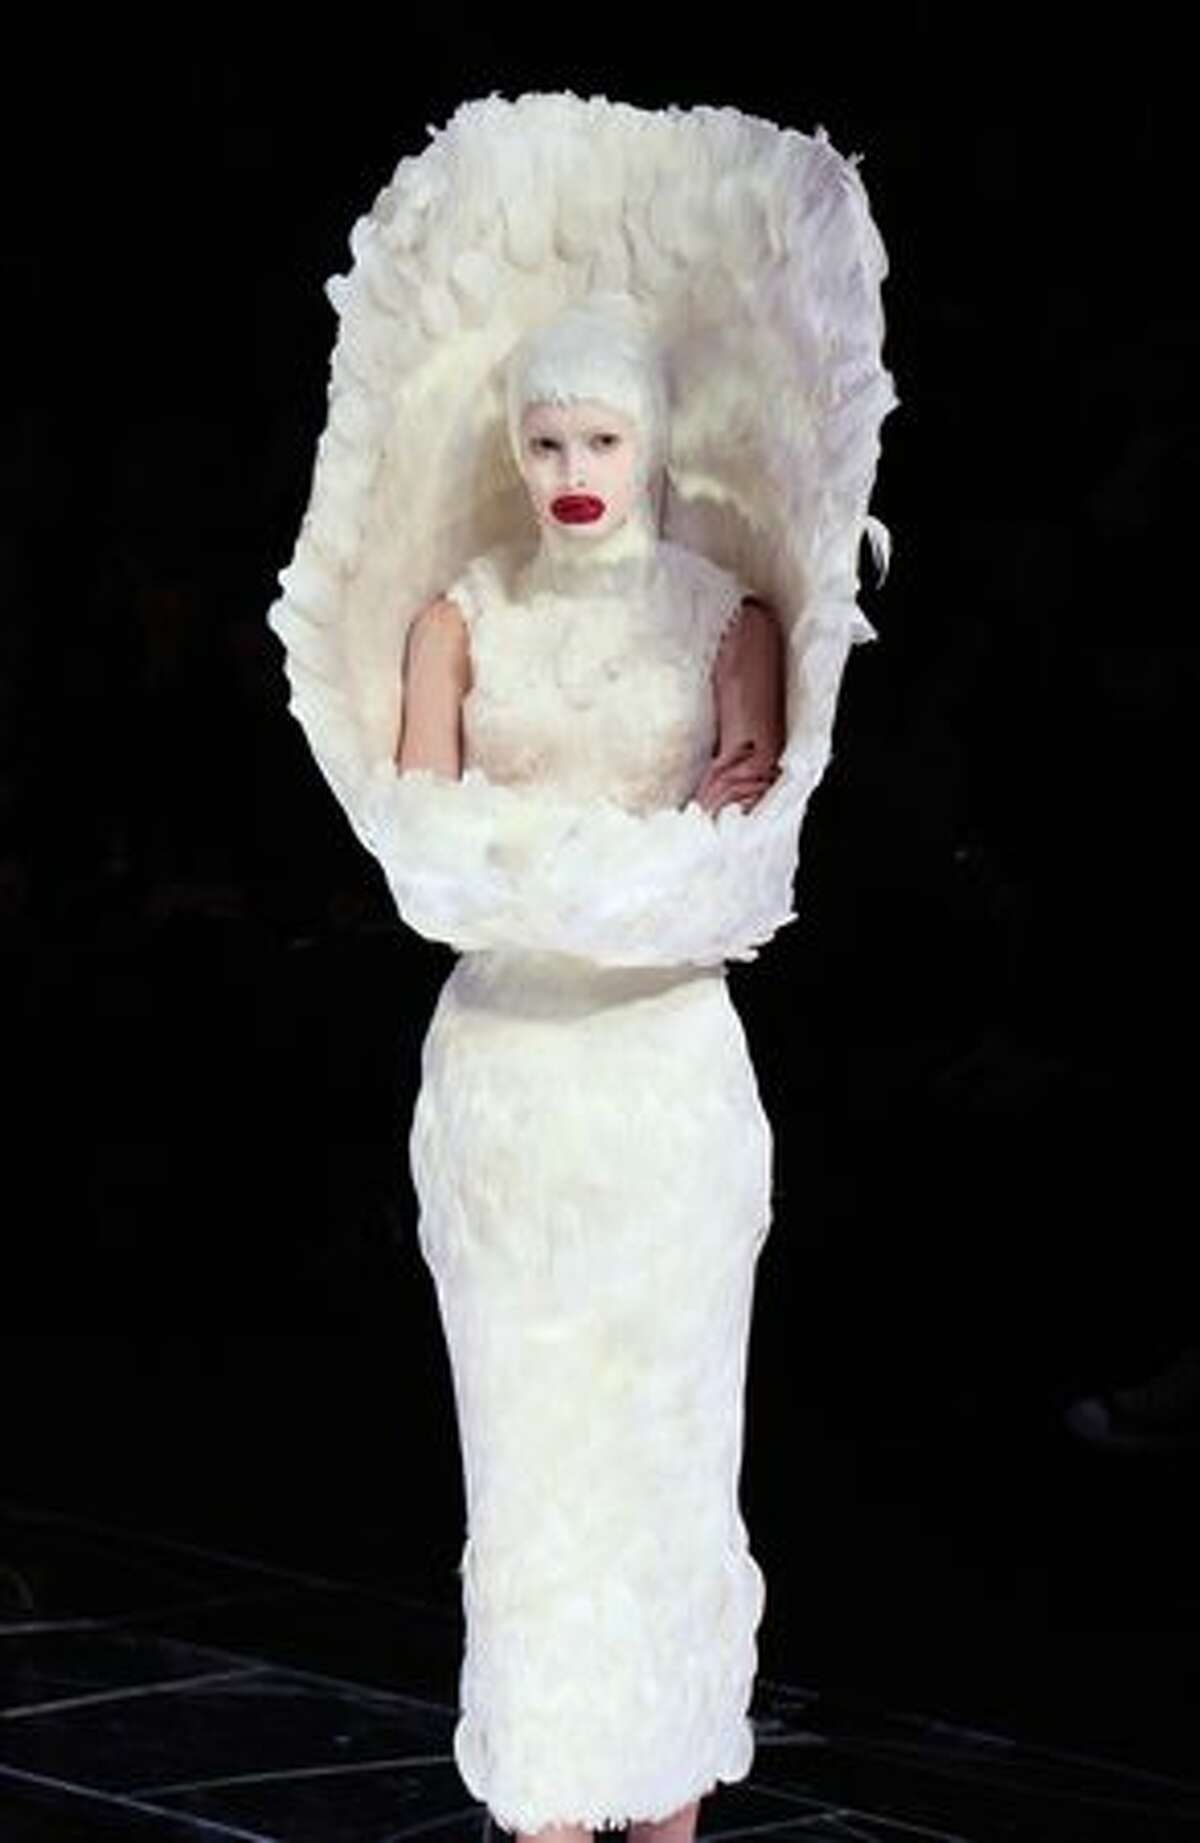 A model presents a creation by Britishn designer Alexander McQueen during the autumn/winter 2009 ready-to-wear collection show in Paris.